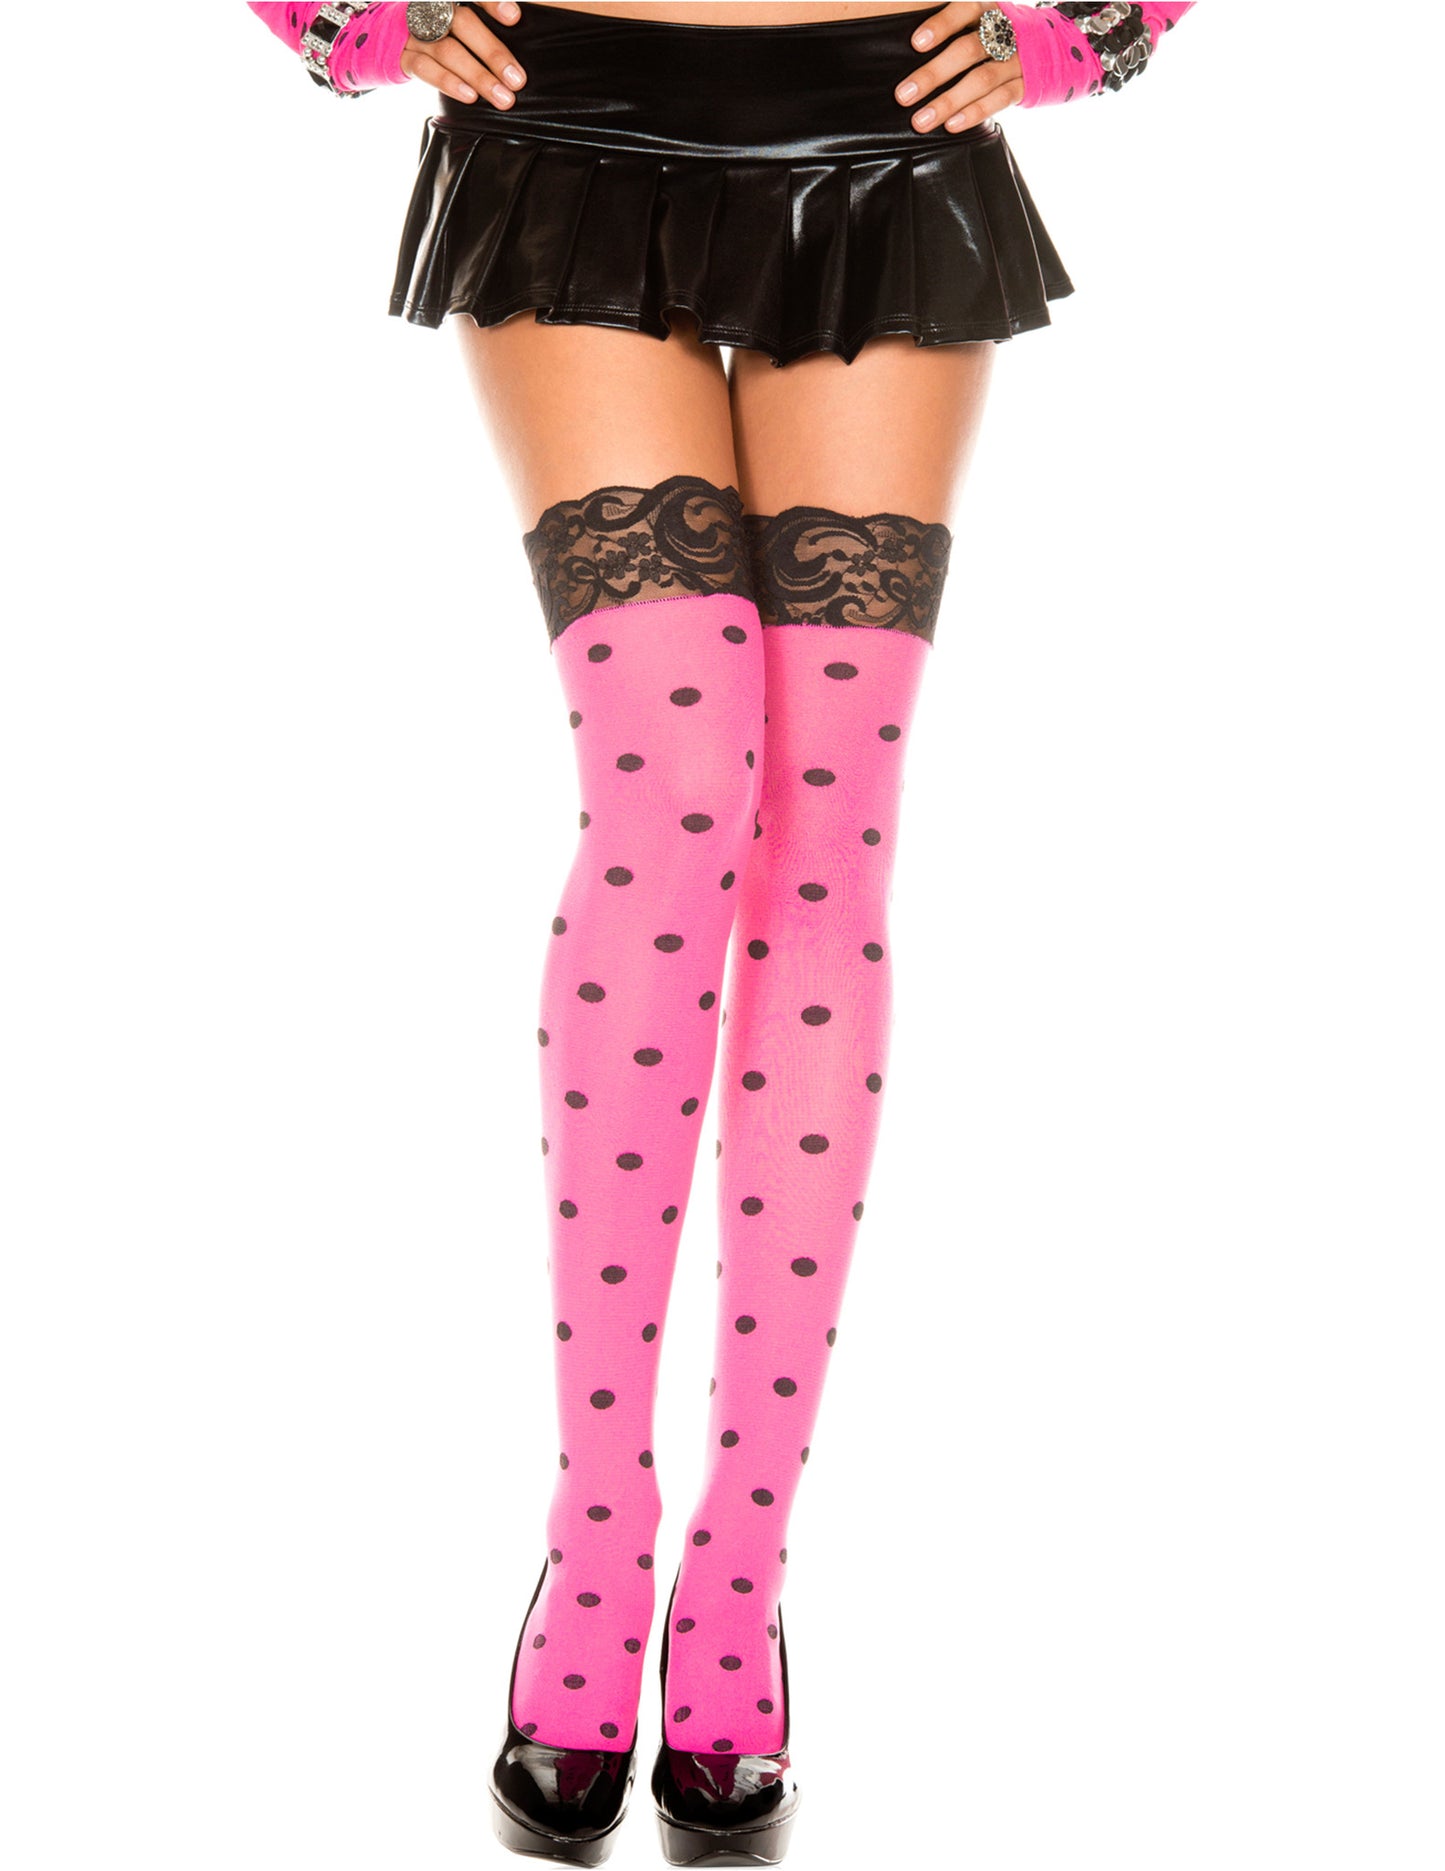 Pink and Black Polka Dot Opaque Thigh Hi Stocking, One Size